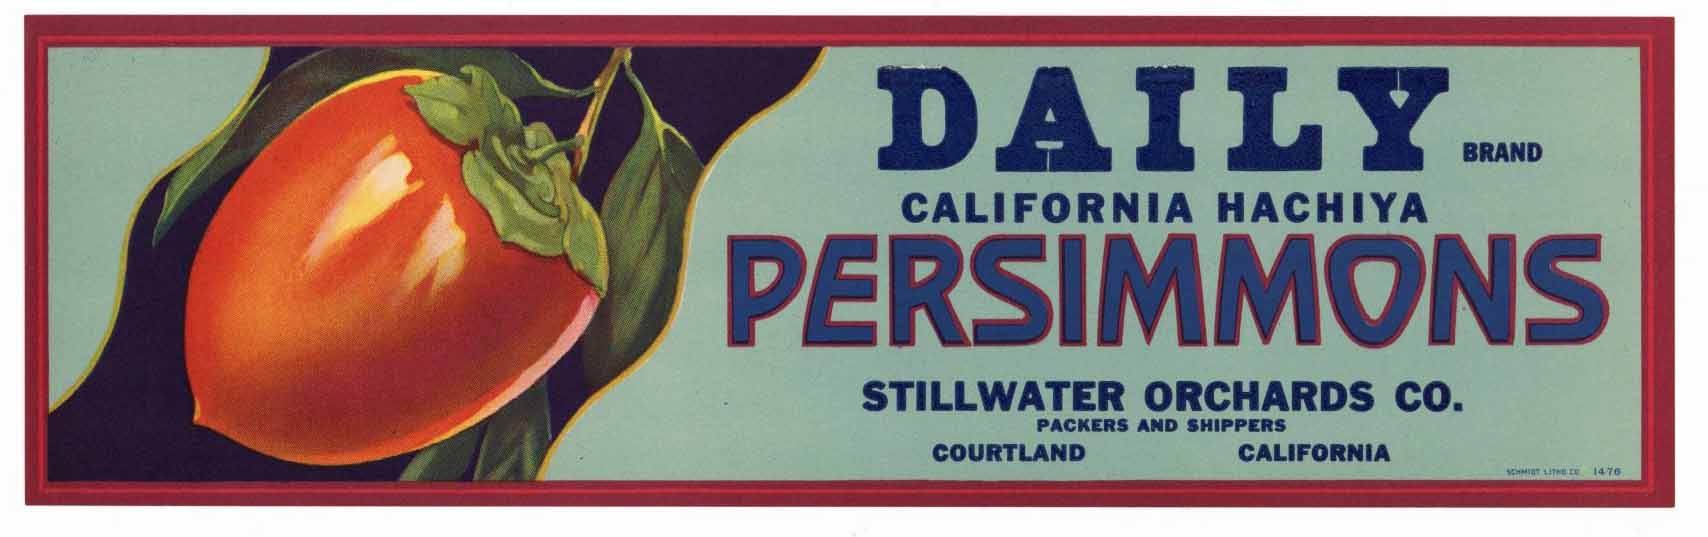 Daily Brand Vintage Persimmon Crate Label